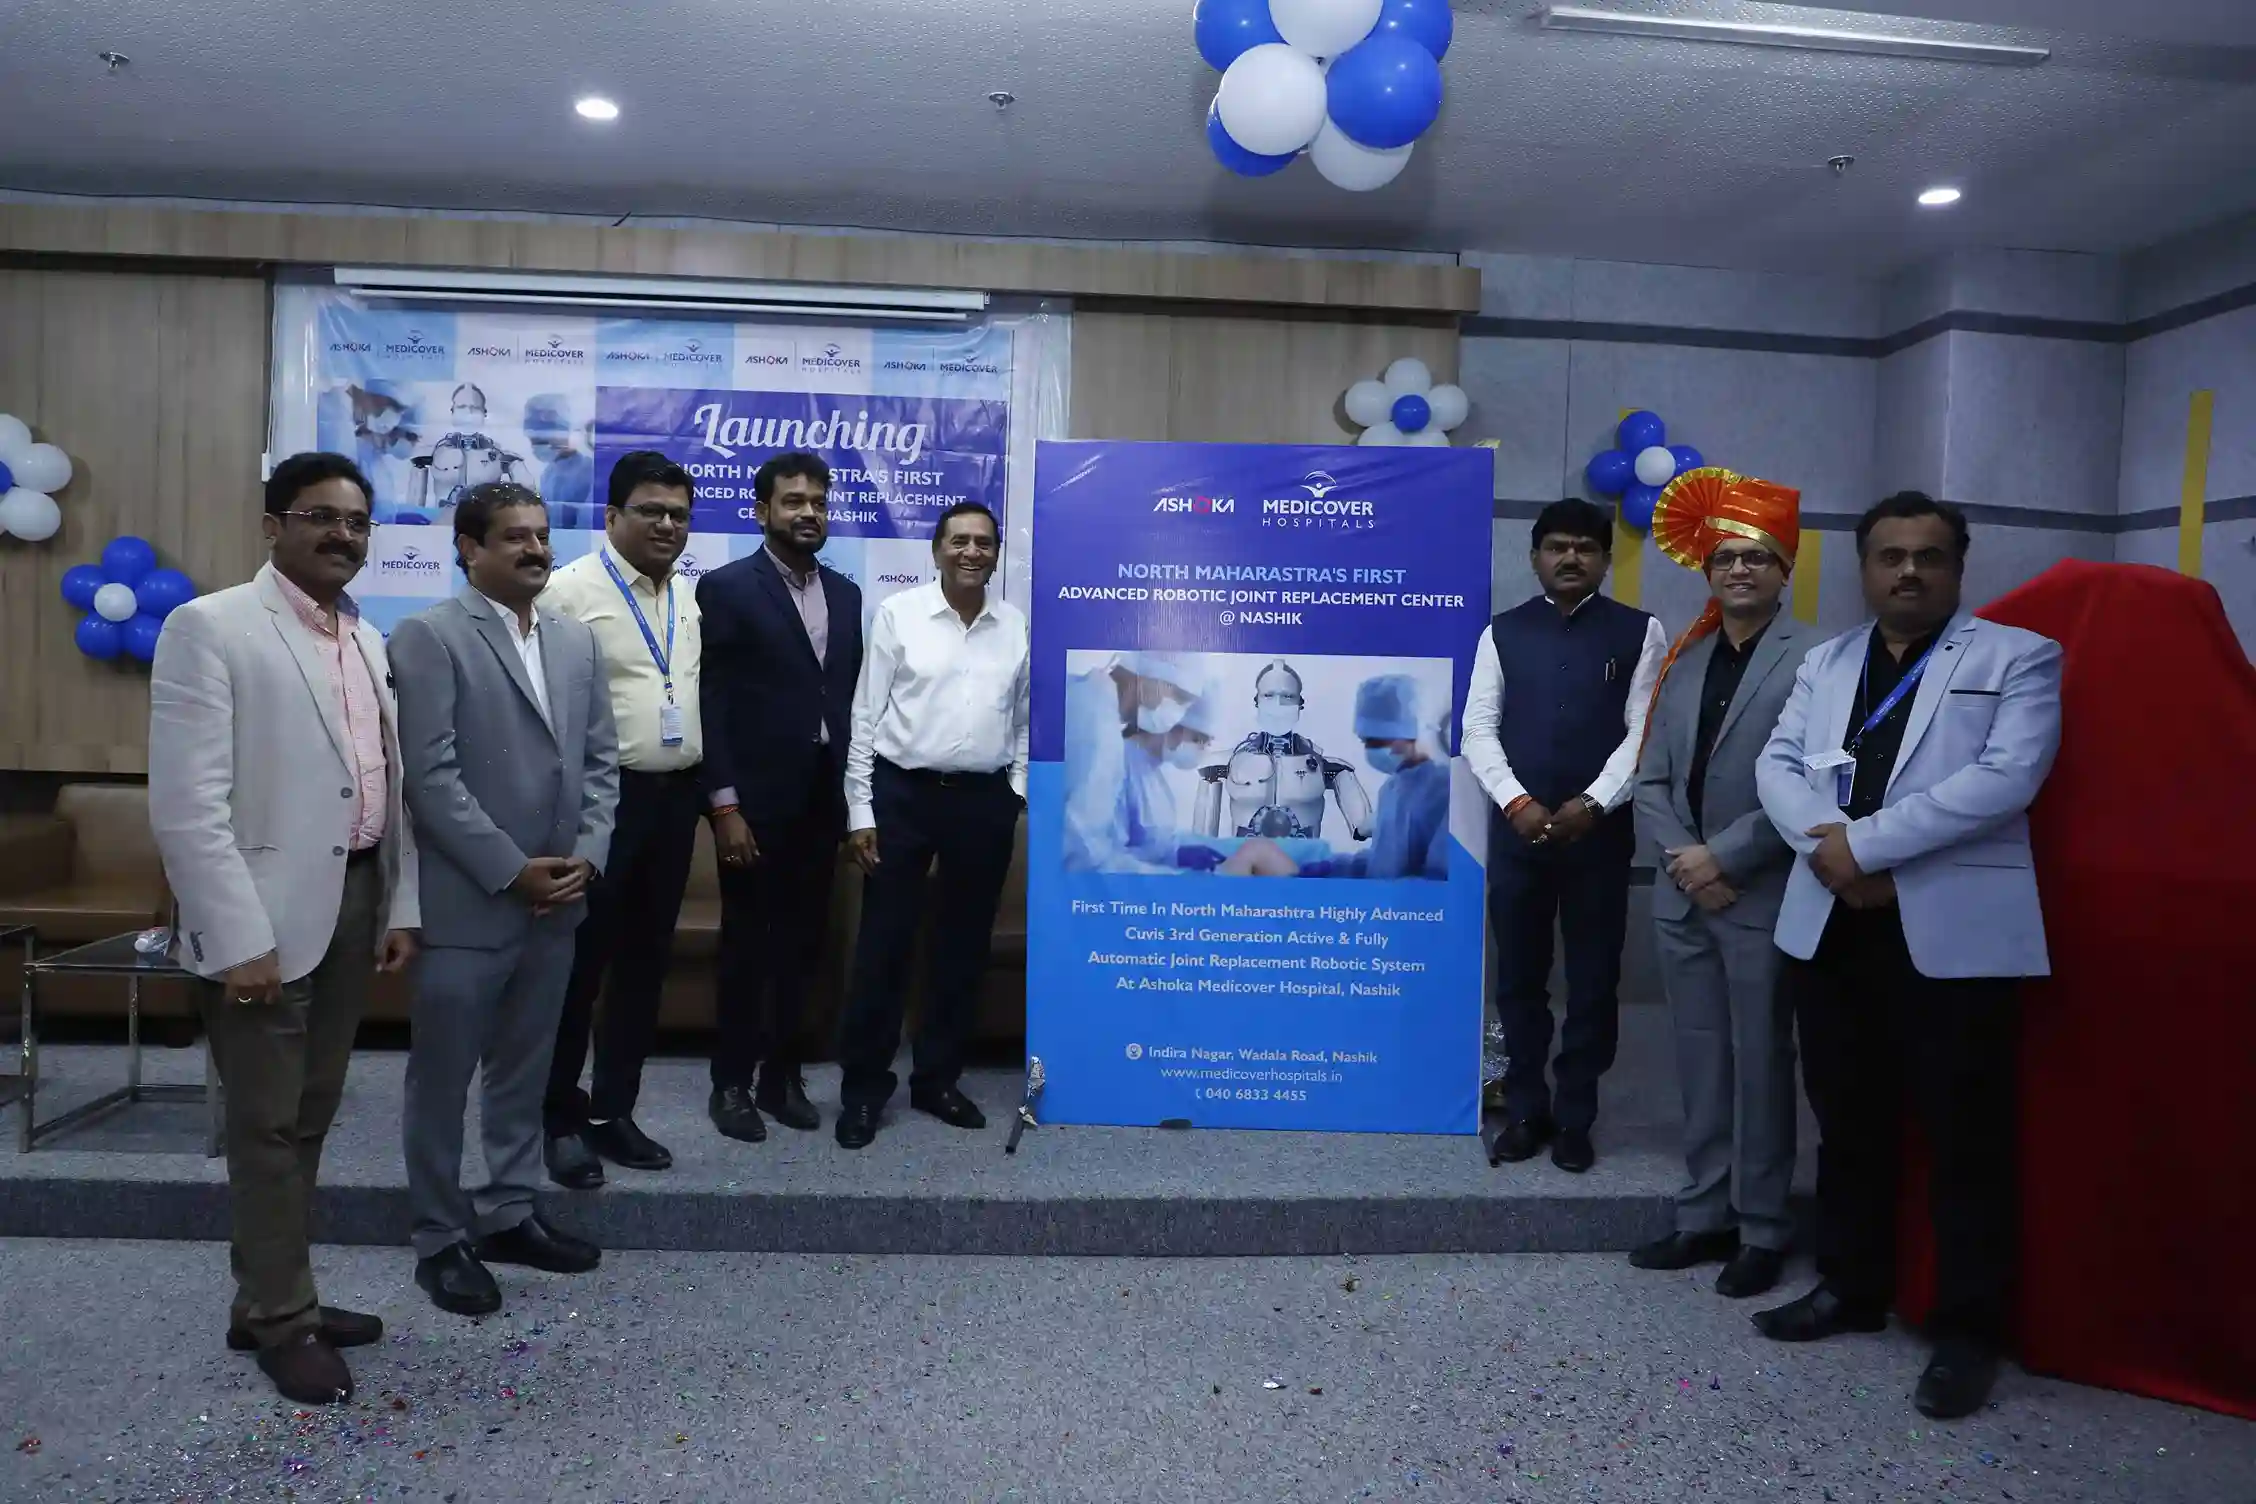 Ashoka Medicover Hospitals, Nashik launches Highly Advanced CUVIS 3rd Generation Active and Fully Automatic Joint Replacement Robotic System for the First Time in North Maharashtra.